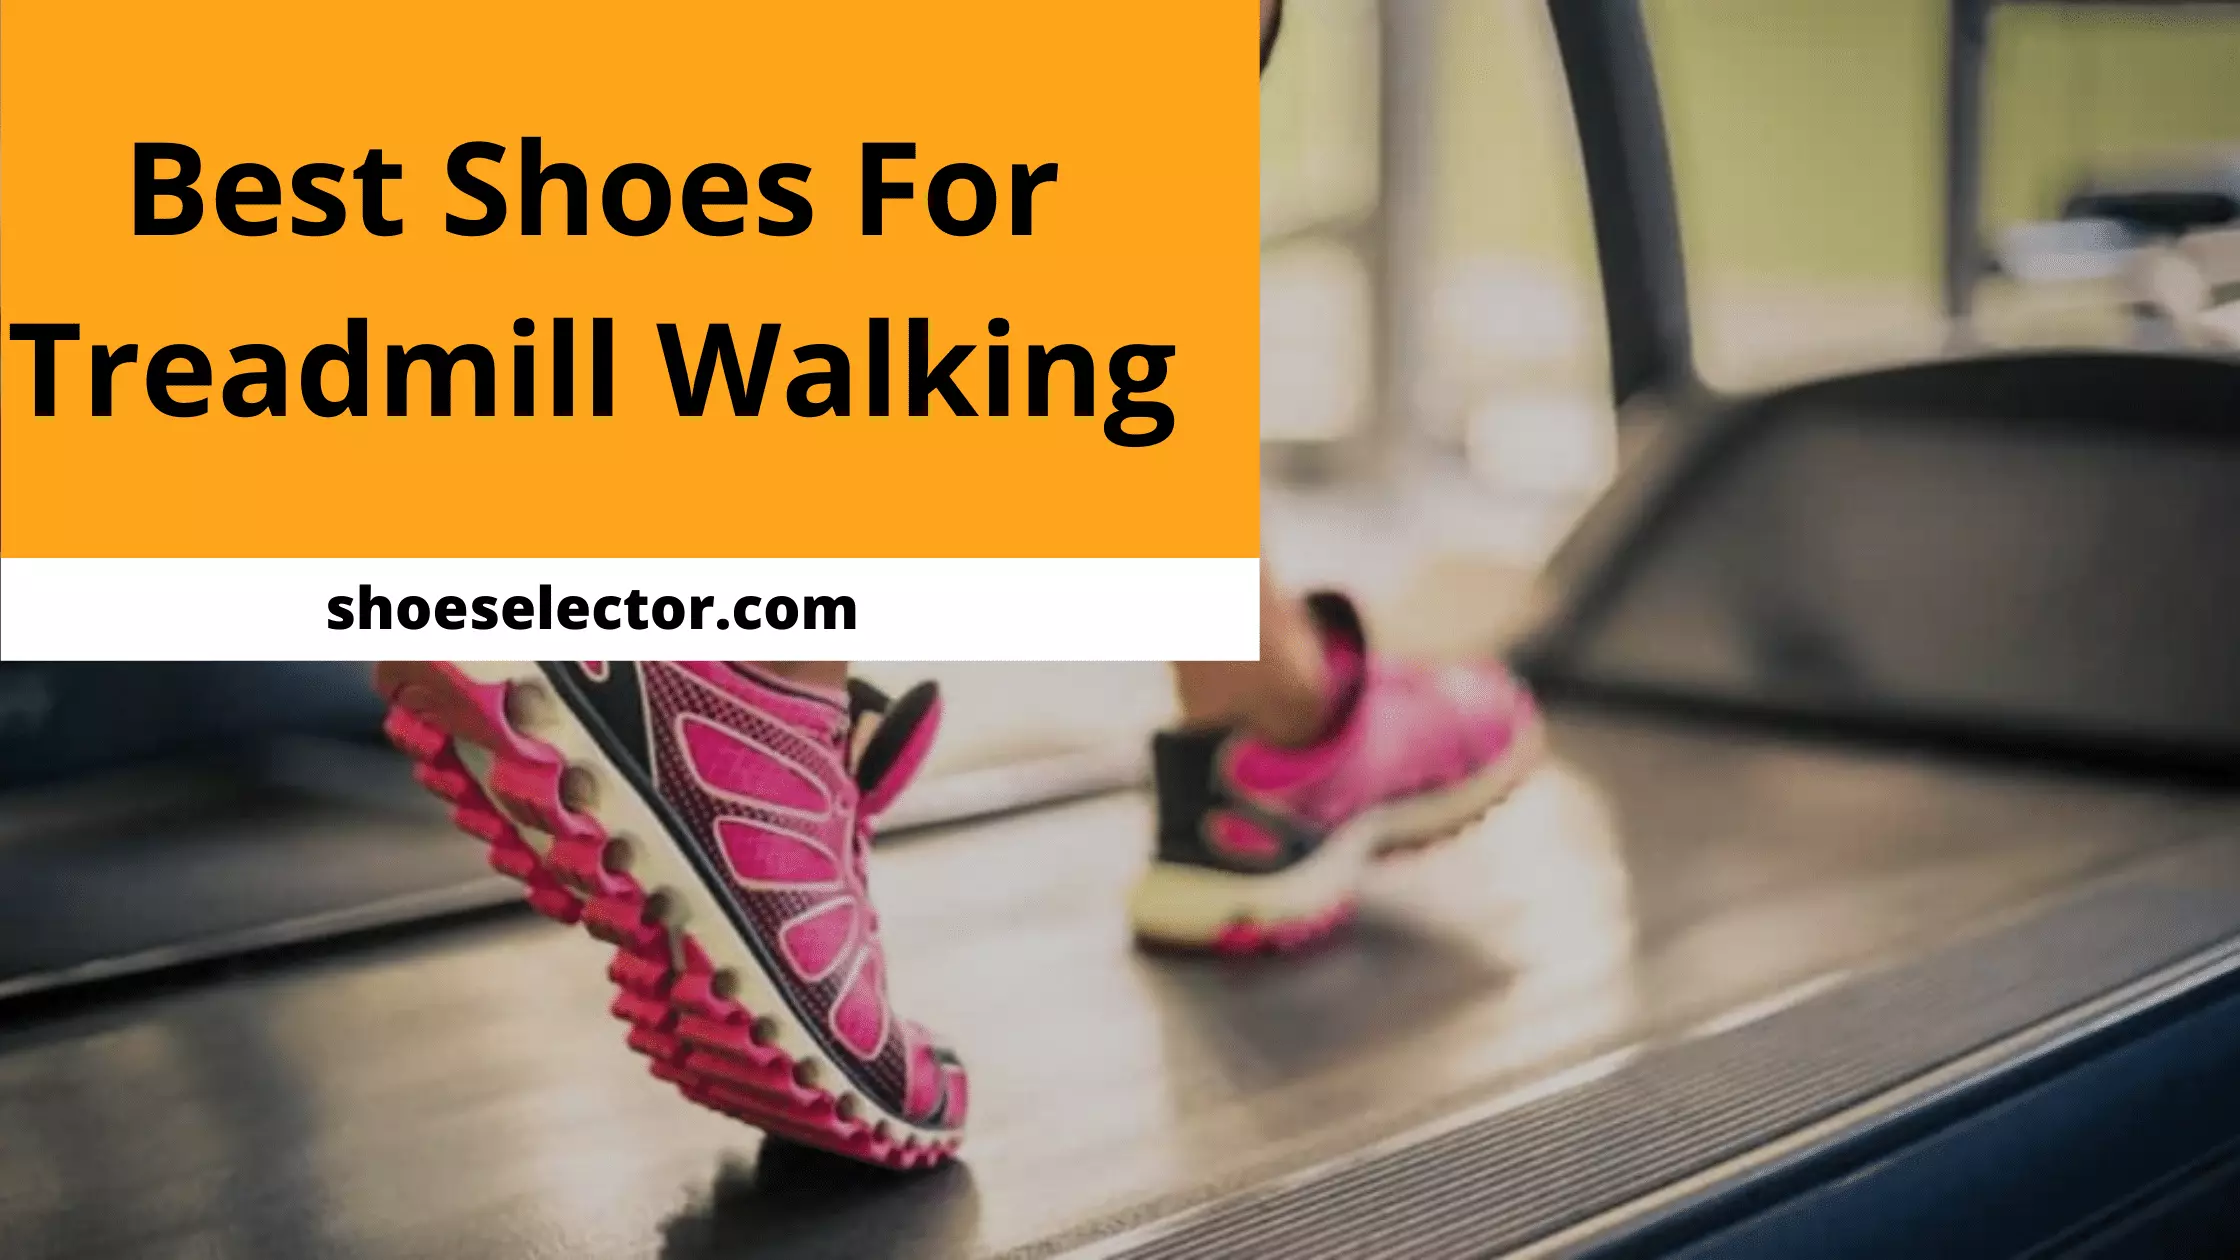 Best Shoes For Treadmill Walking - Detailed Guide